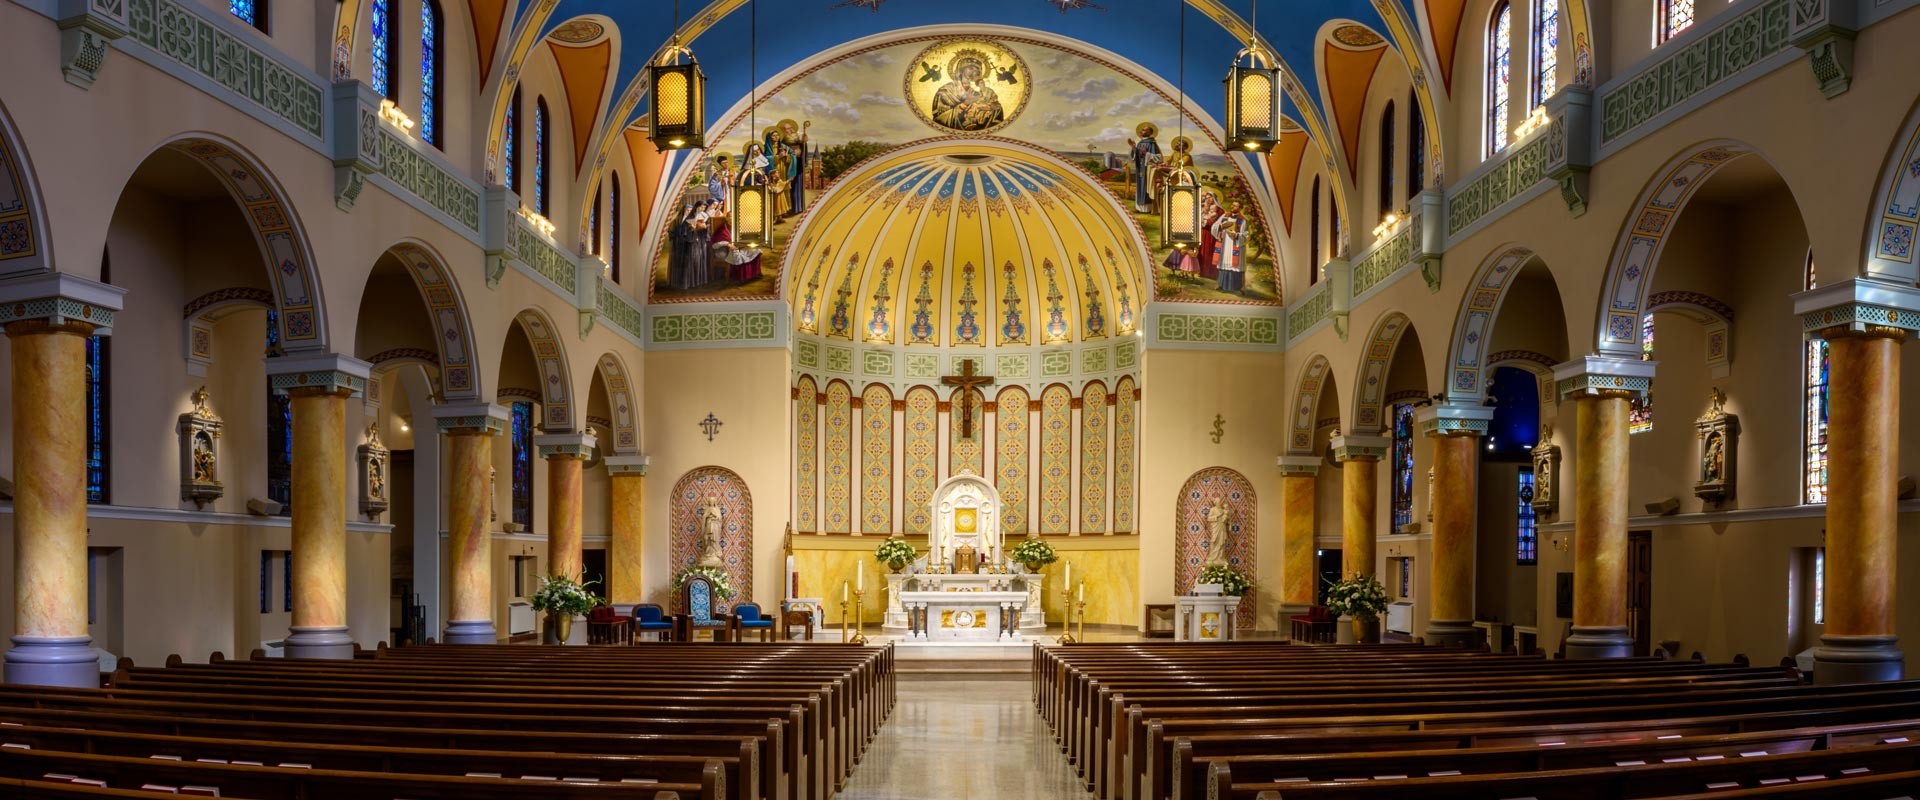 Interior Design and Renovation for the Cathedral of Our Lady of Perpetual Help